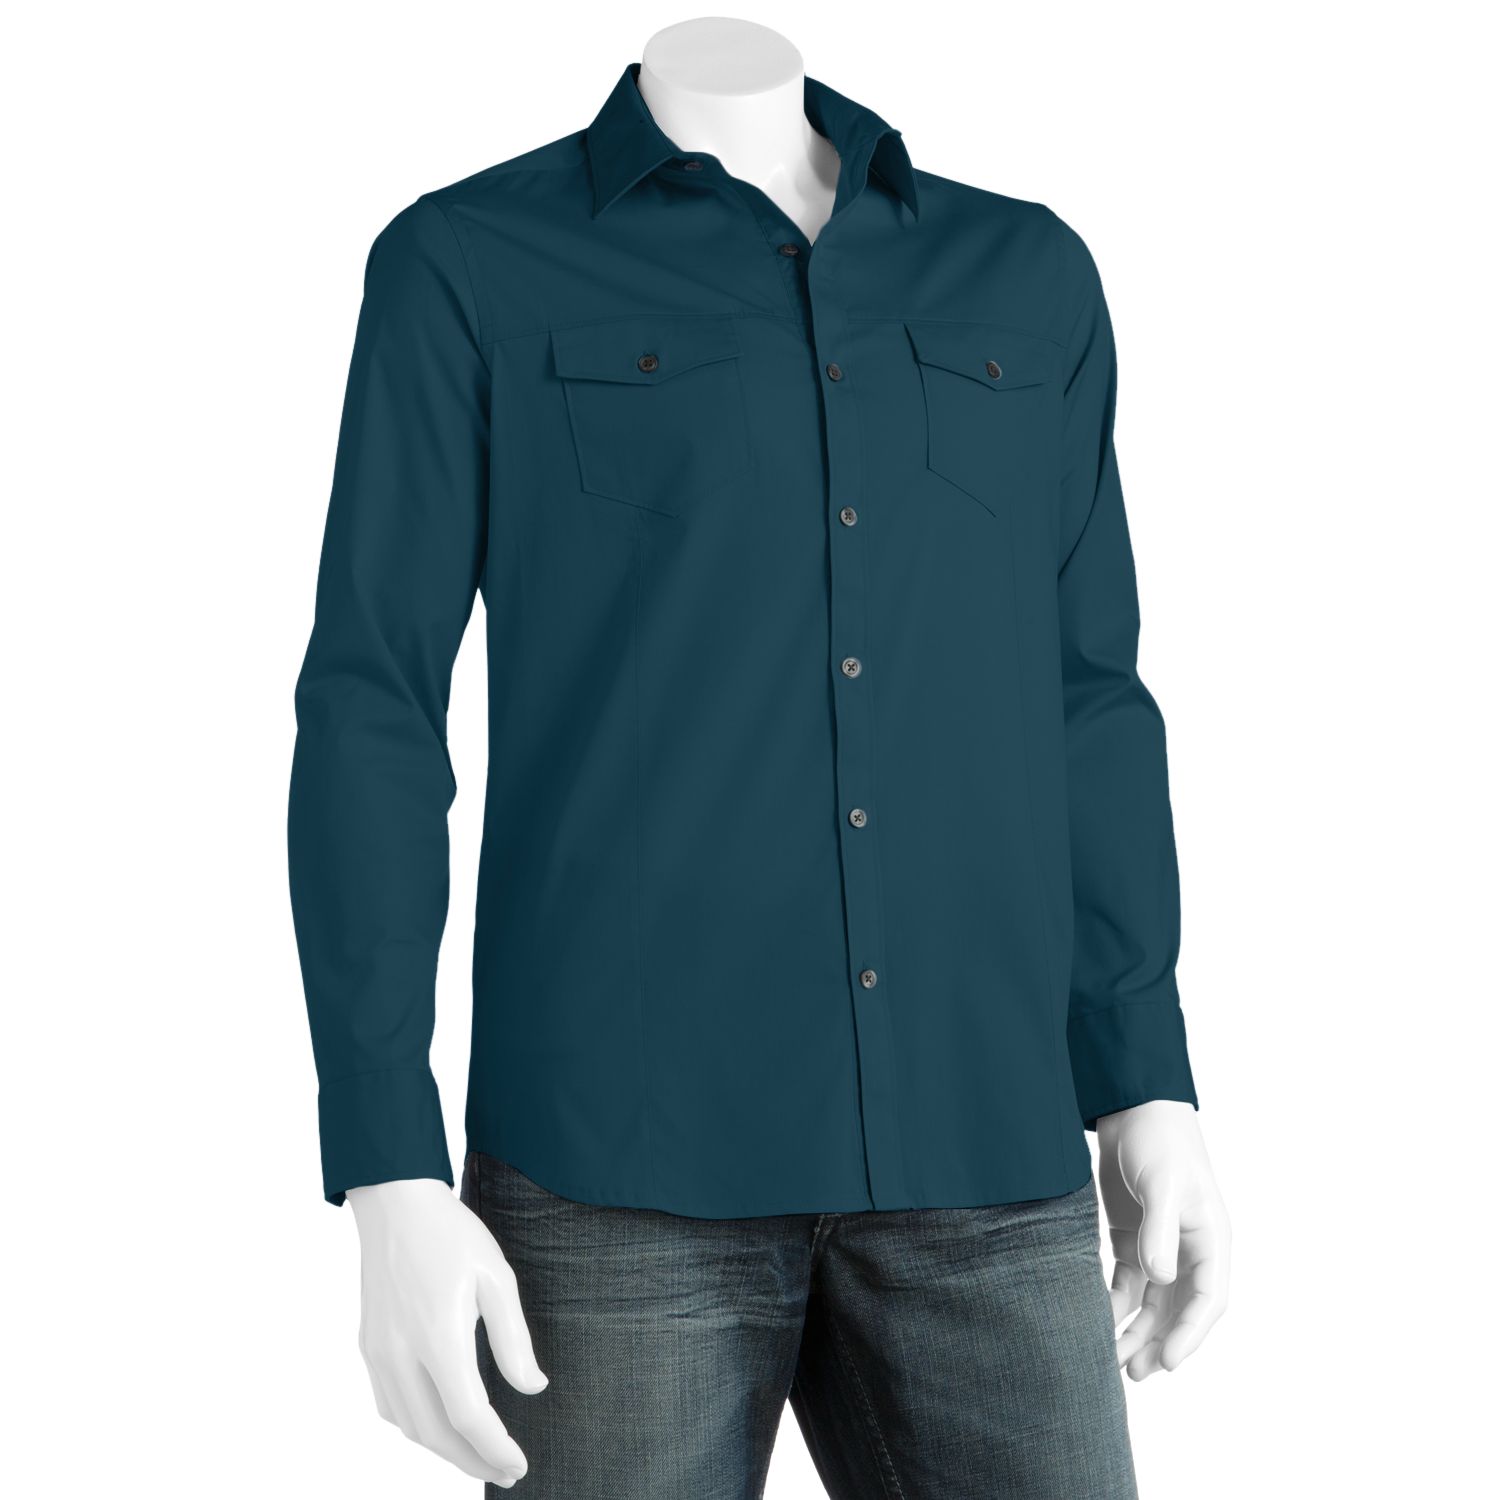 athletic fit casual button down shirts